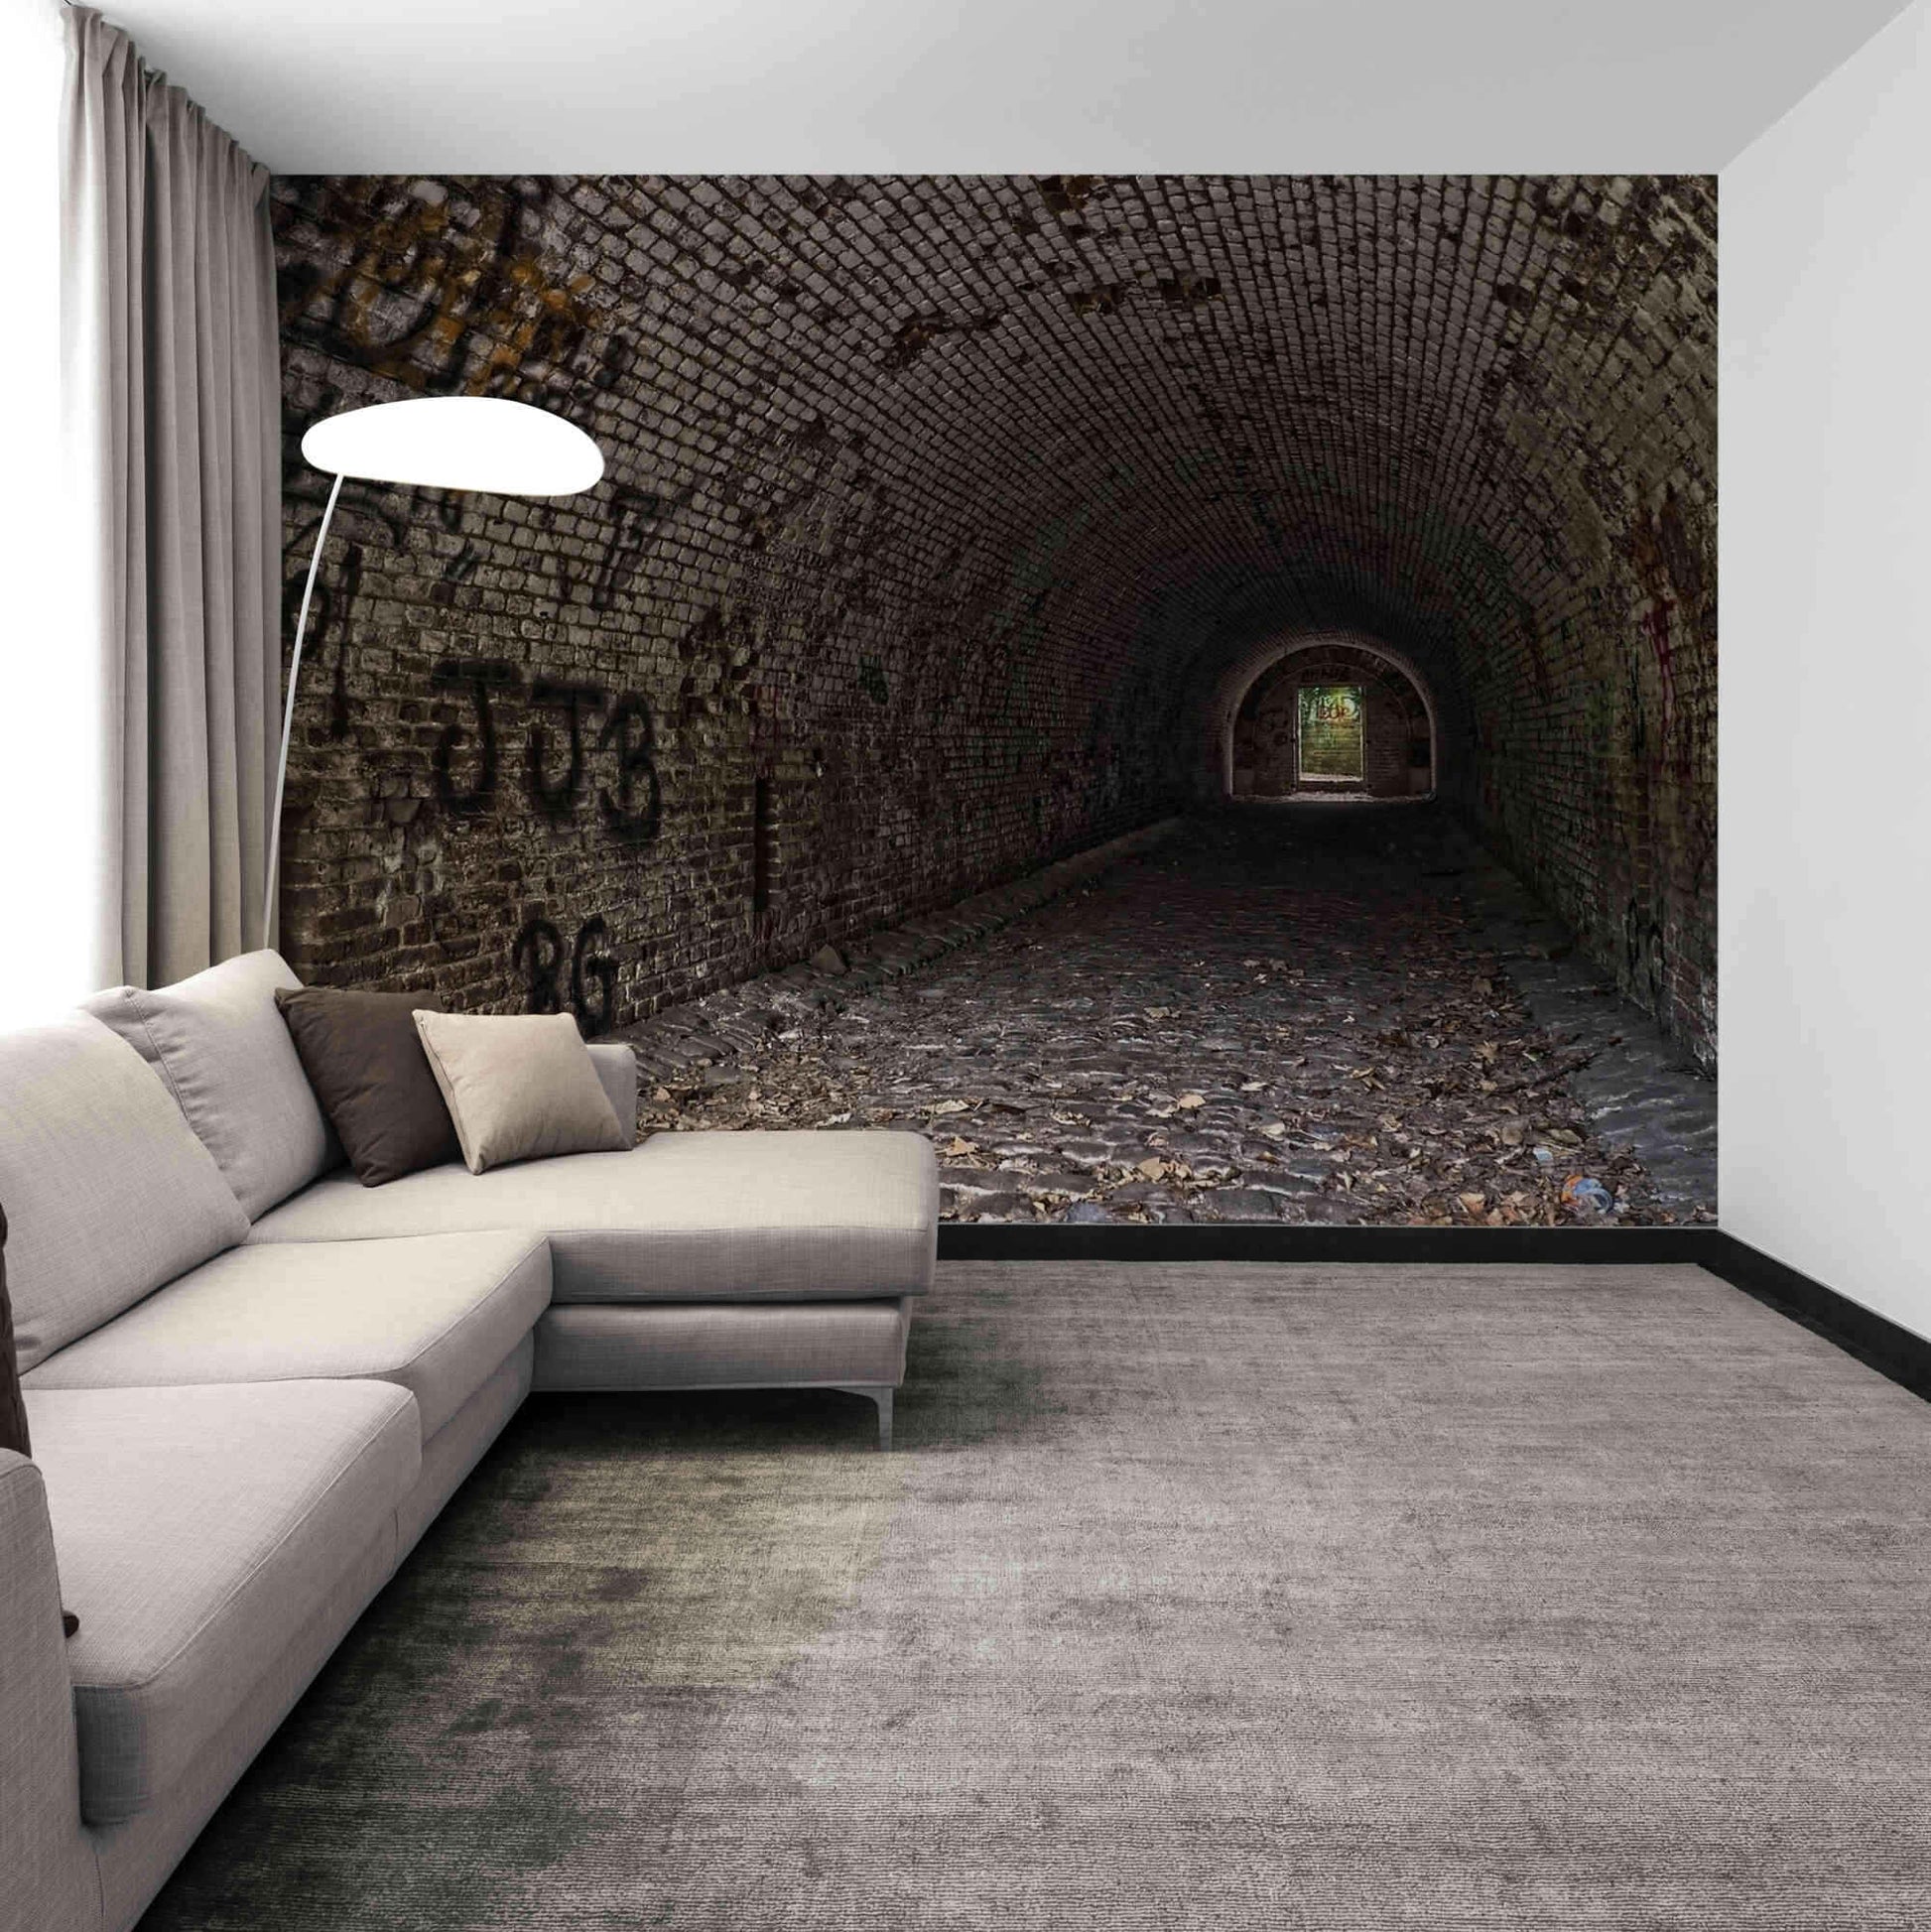 Perspective-Enhancing Tunnel Wallpaper